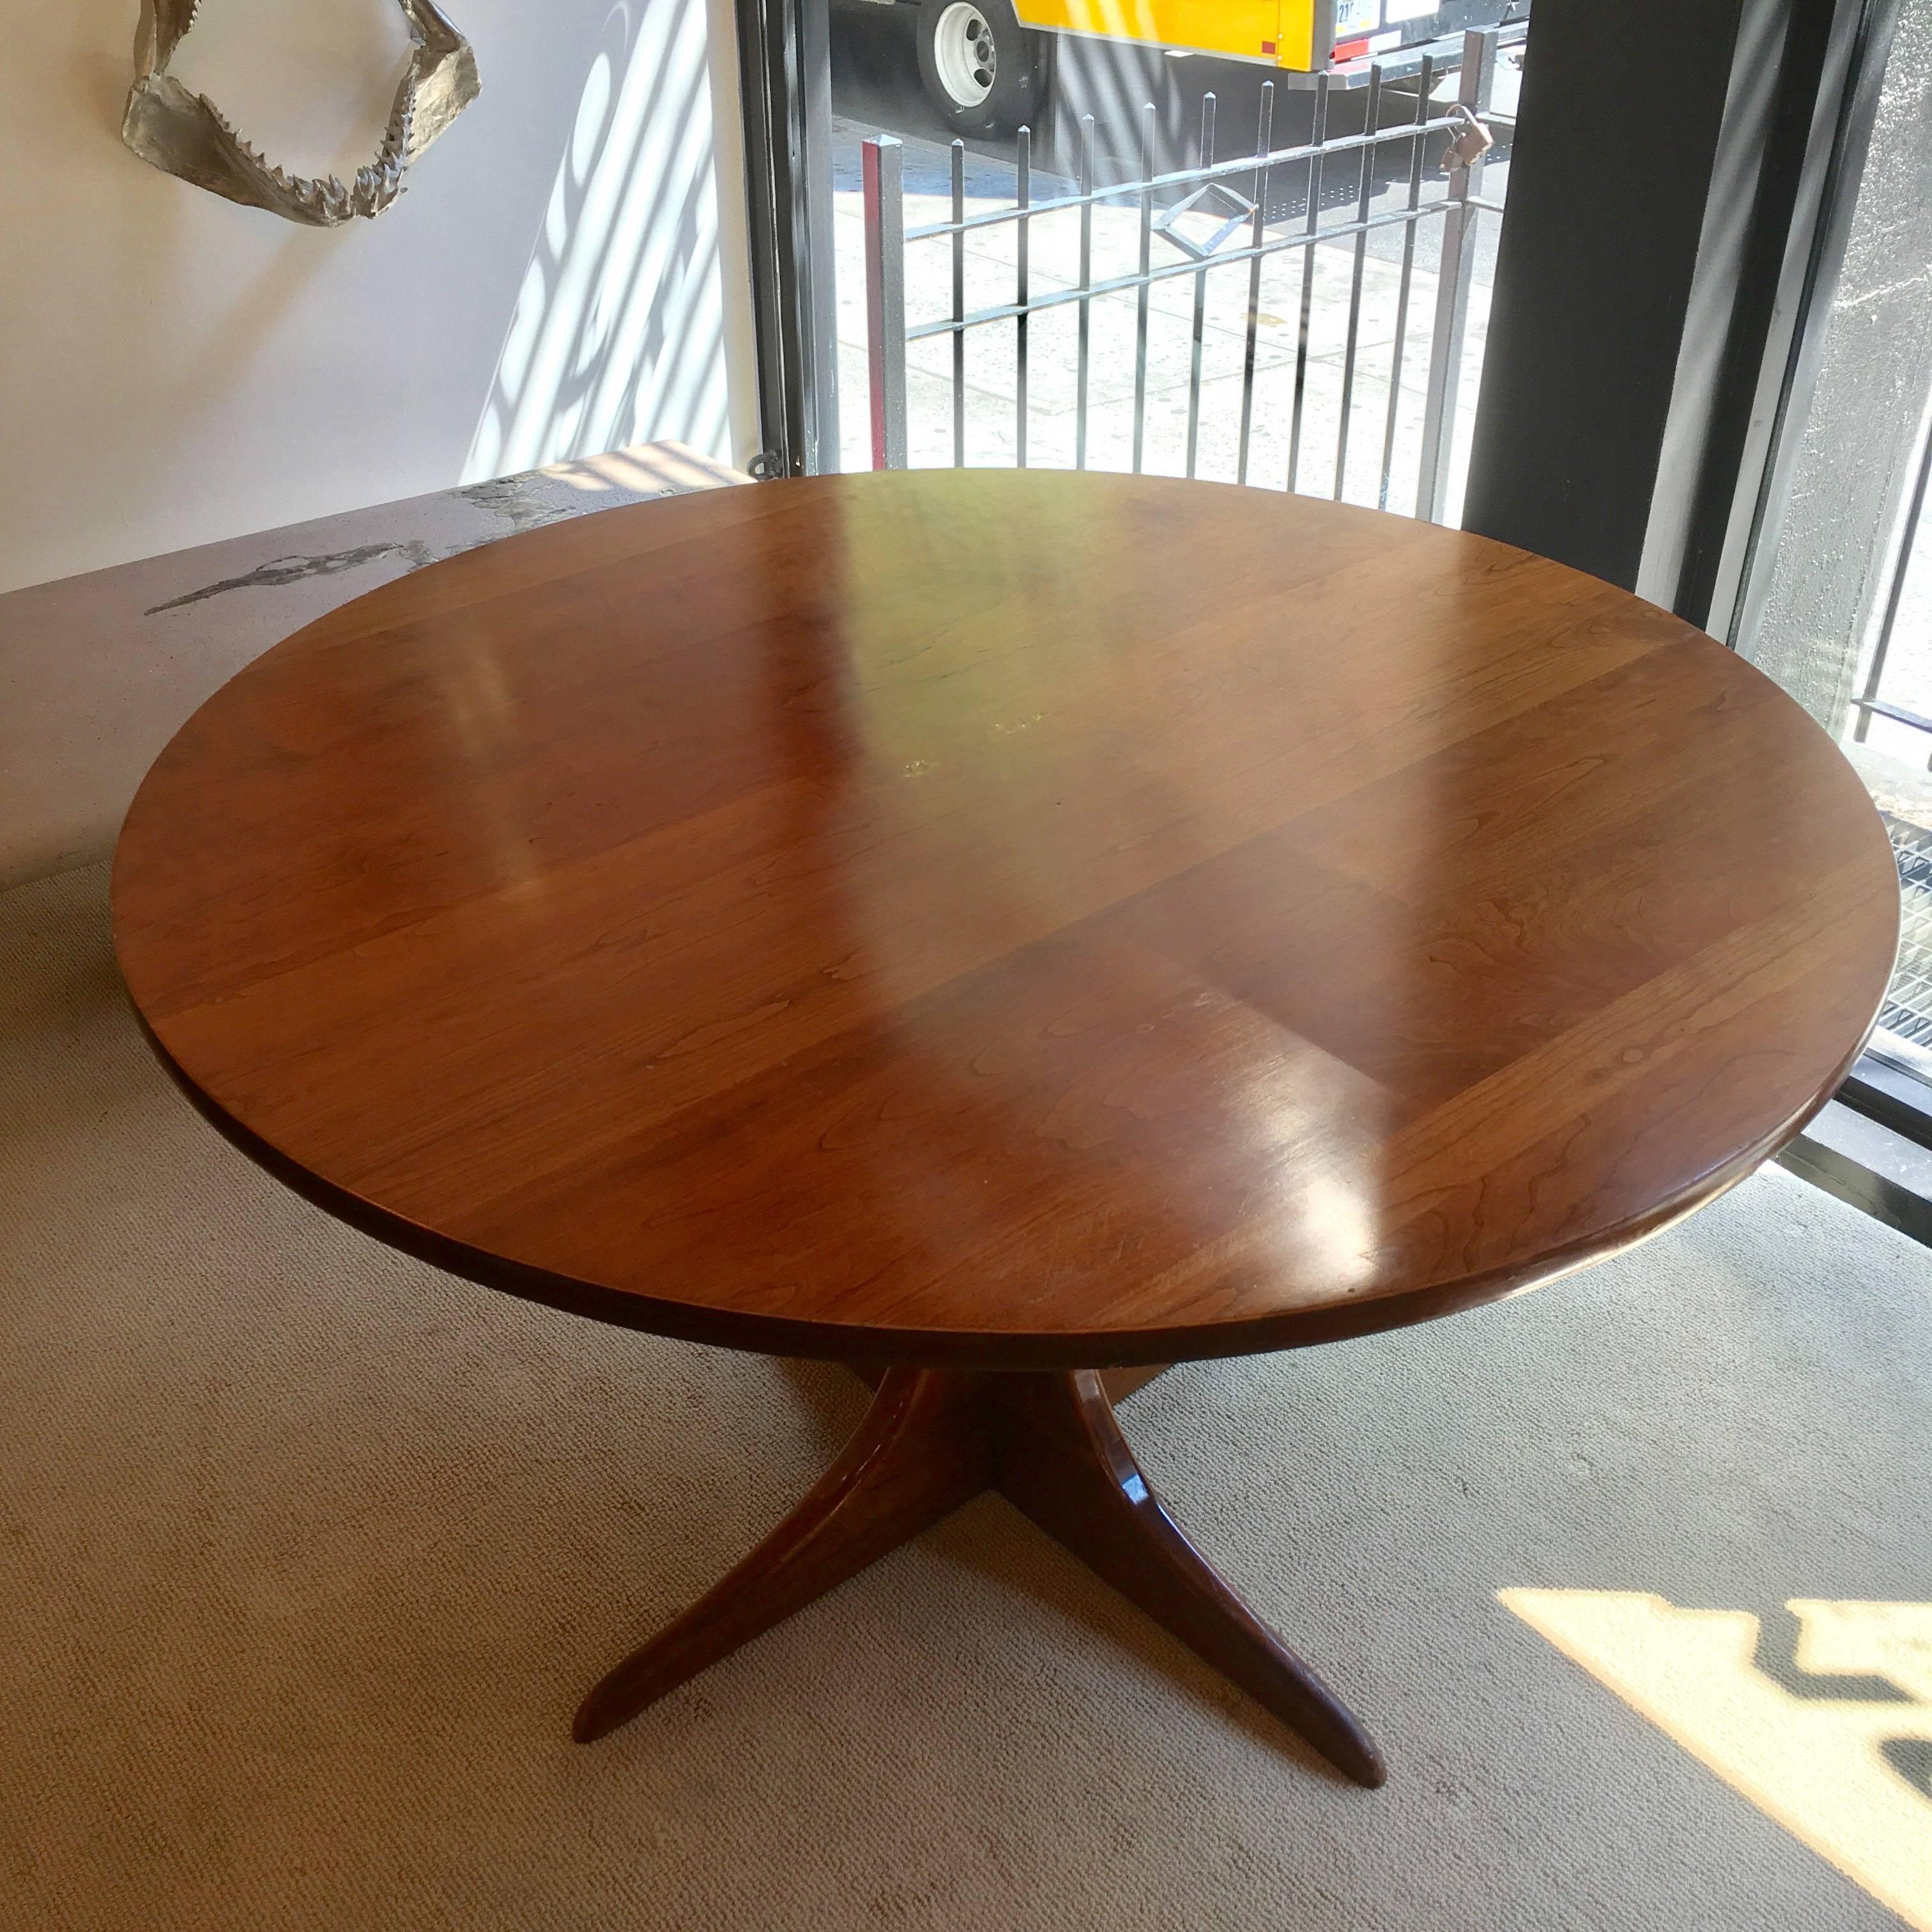 An original American 1960s Heywood Wakefield Cliff House dining table composed of solid cherry with a brown doeskin finish.


The late 1960s brought the Cliff House collection, named for the famous San Francisco hotel. Cliff House was constructed